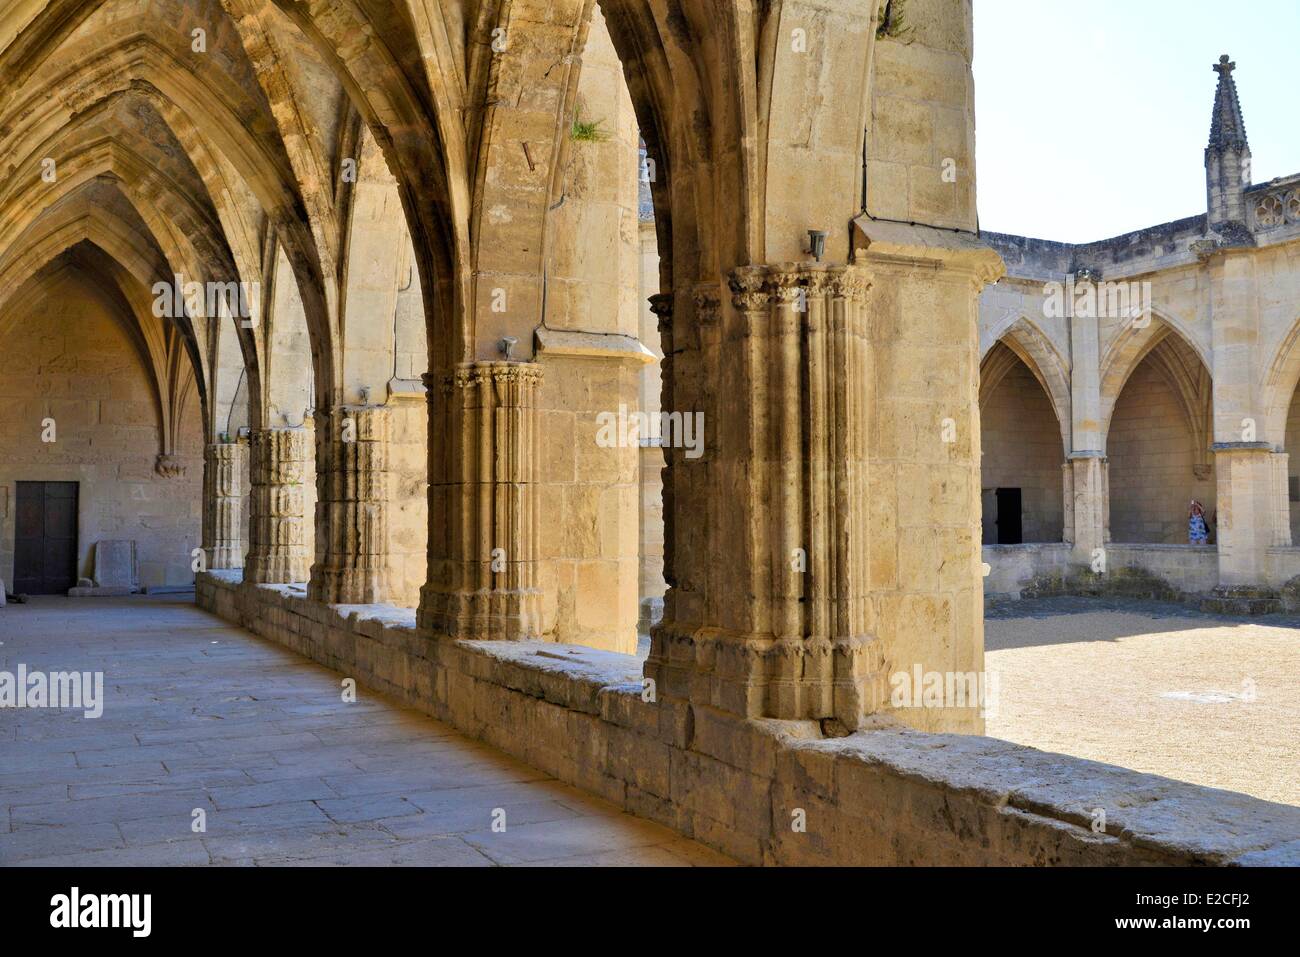 France, Herault, Beziers, Cathedral Saint Nazaire, convent which shelters a concise collection of statues Stock Photo